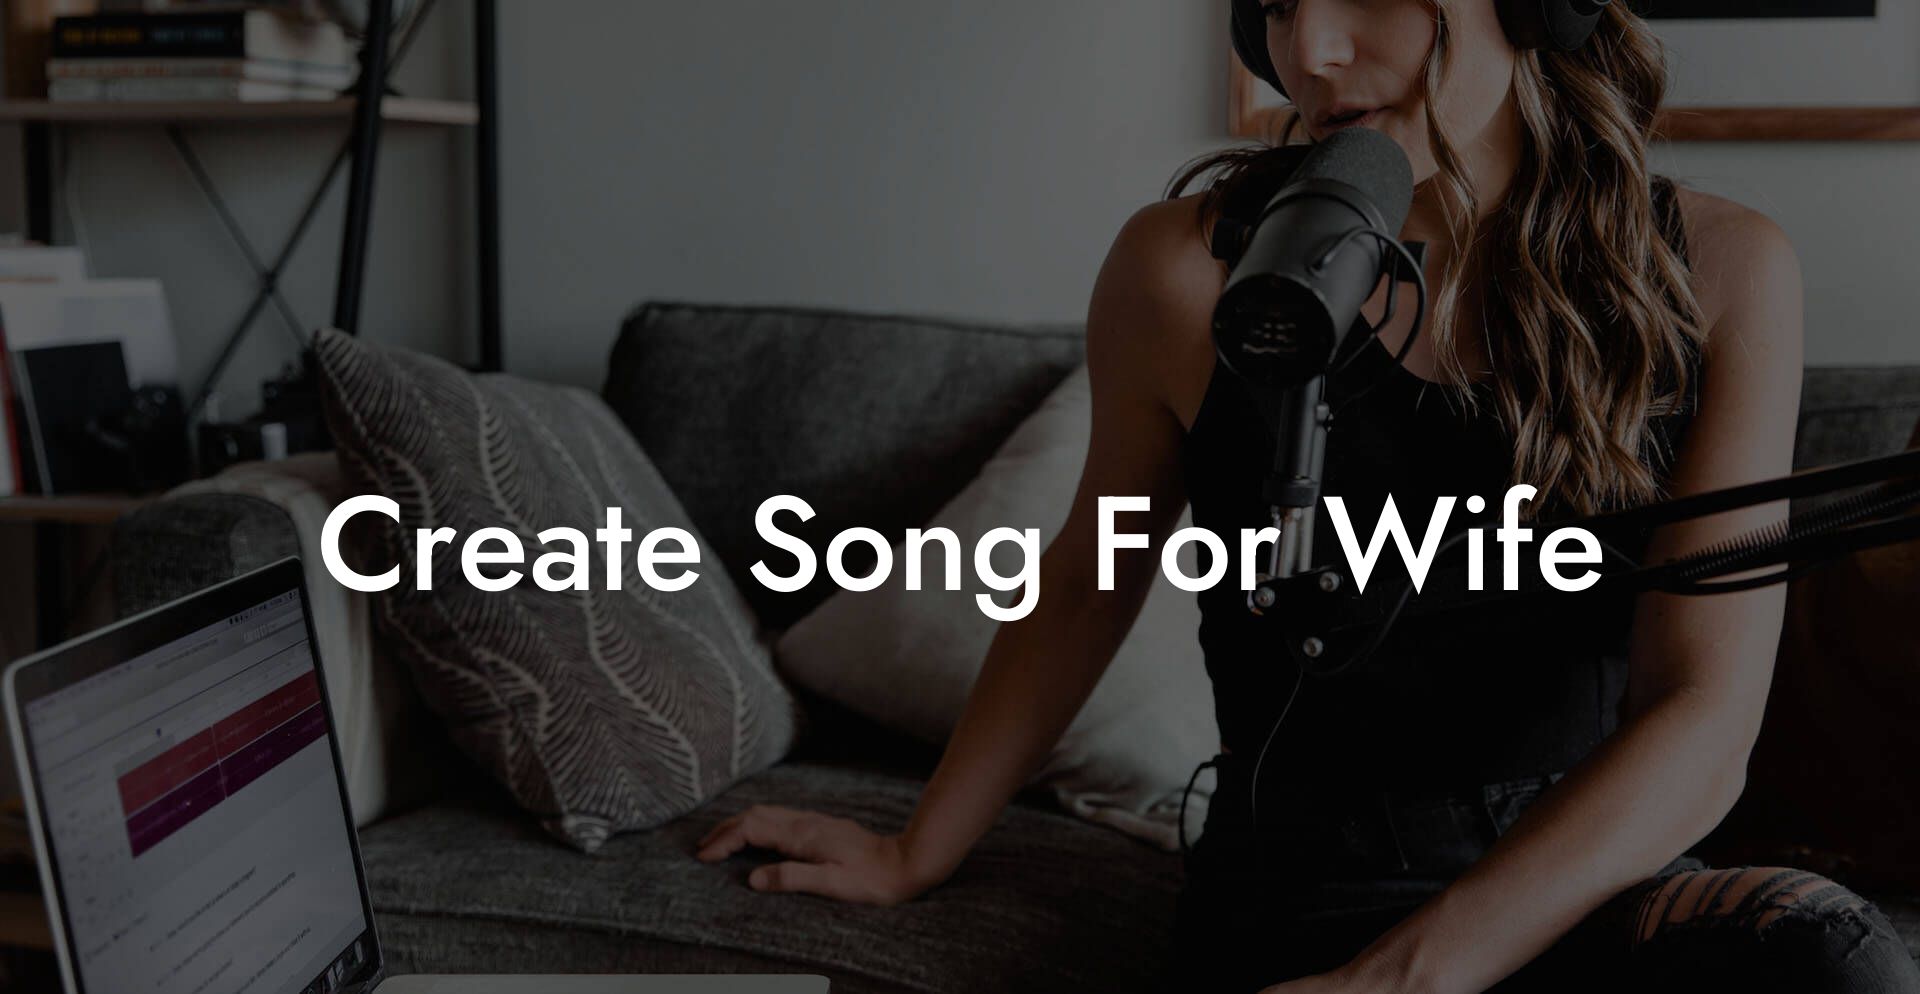 create song for wife lyric assistant